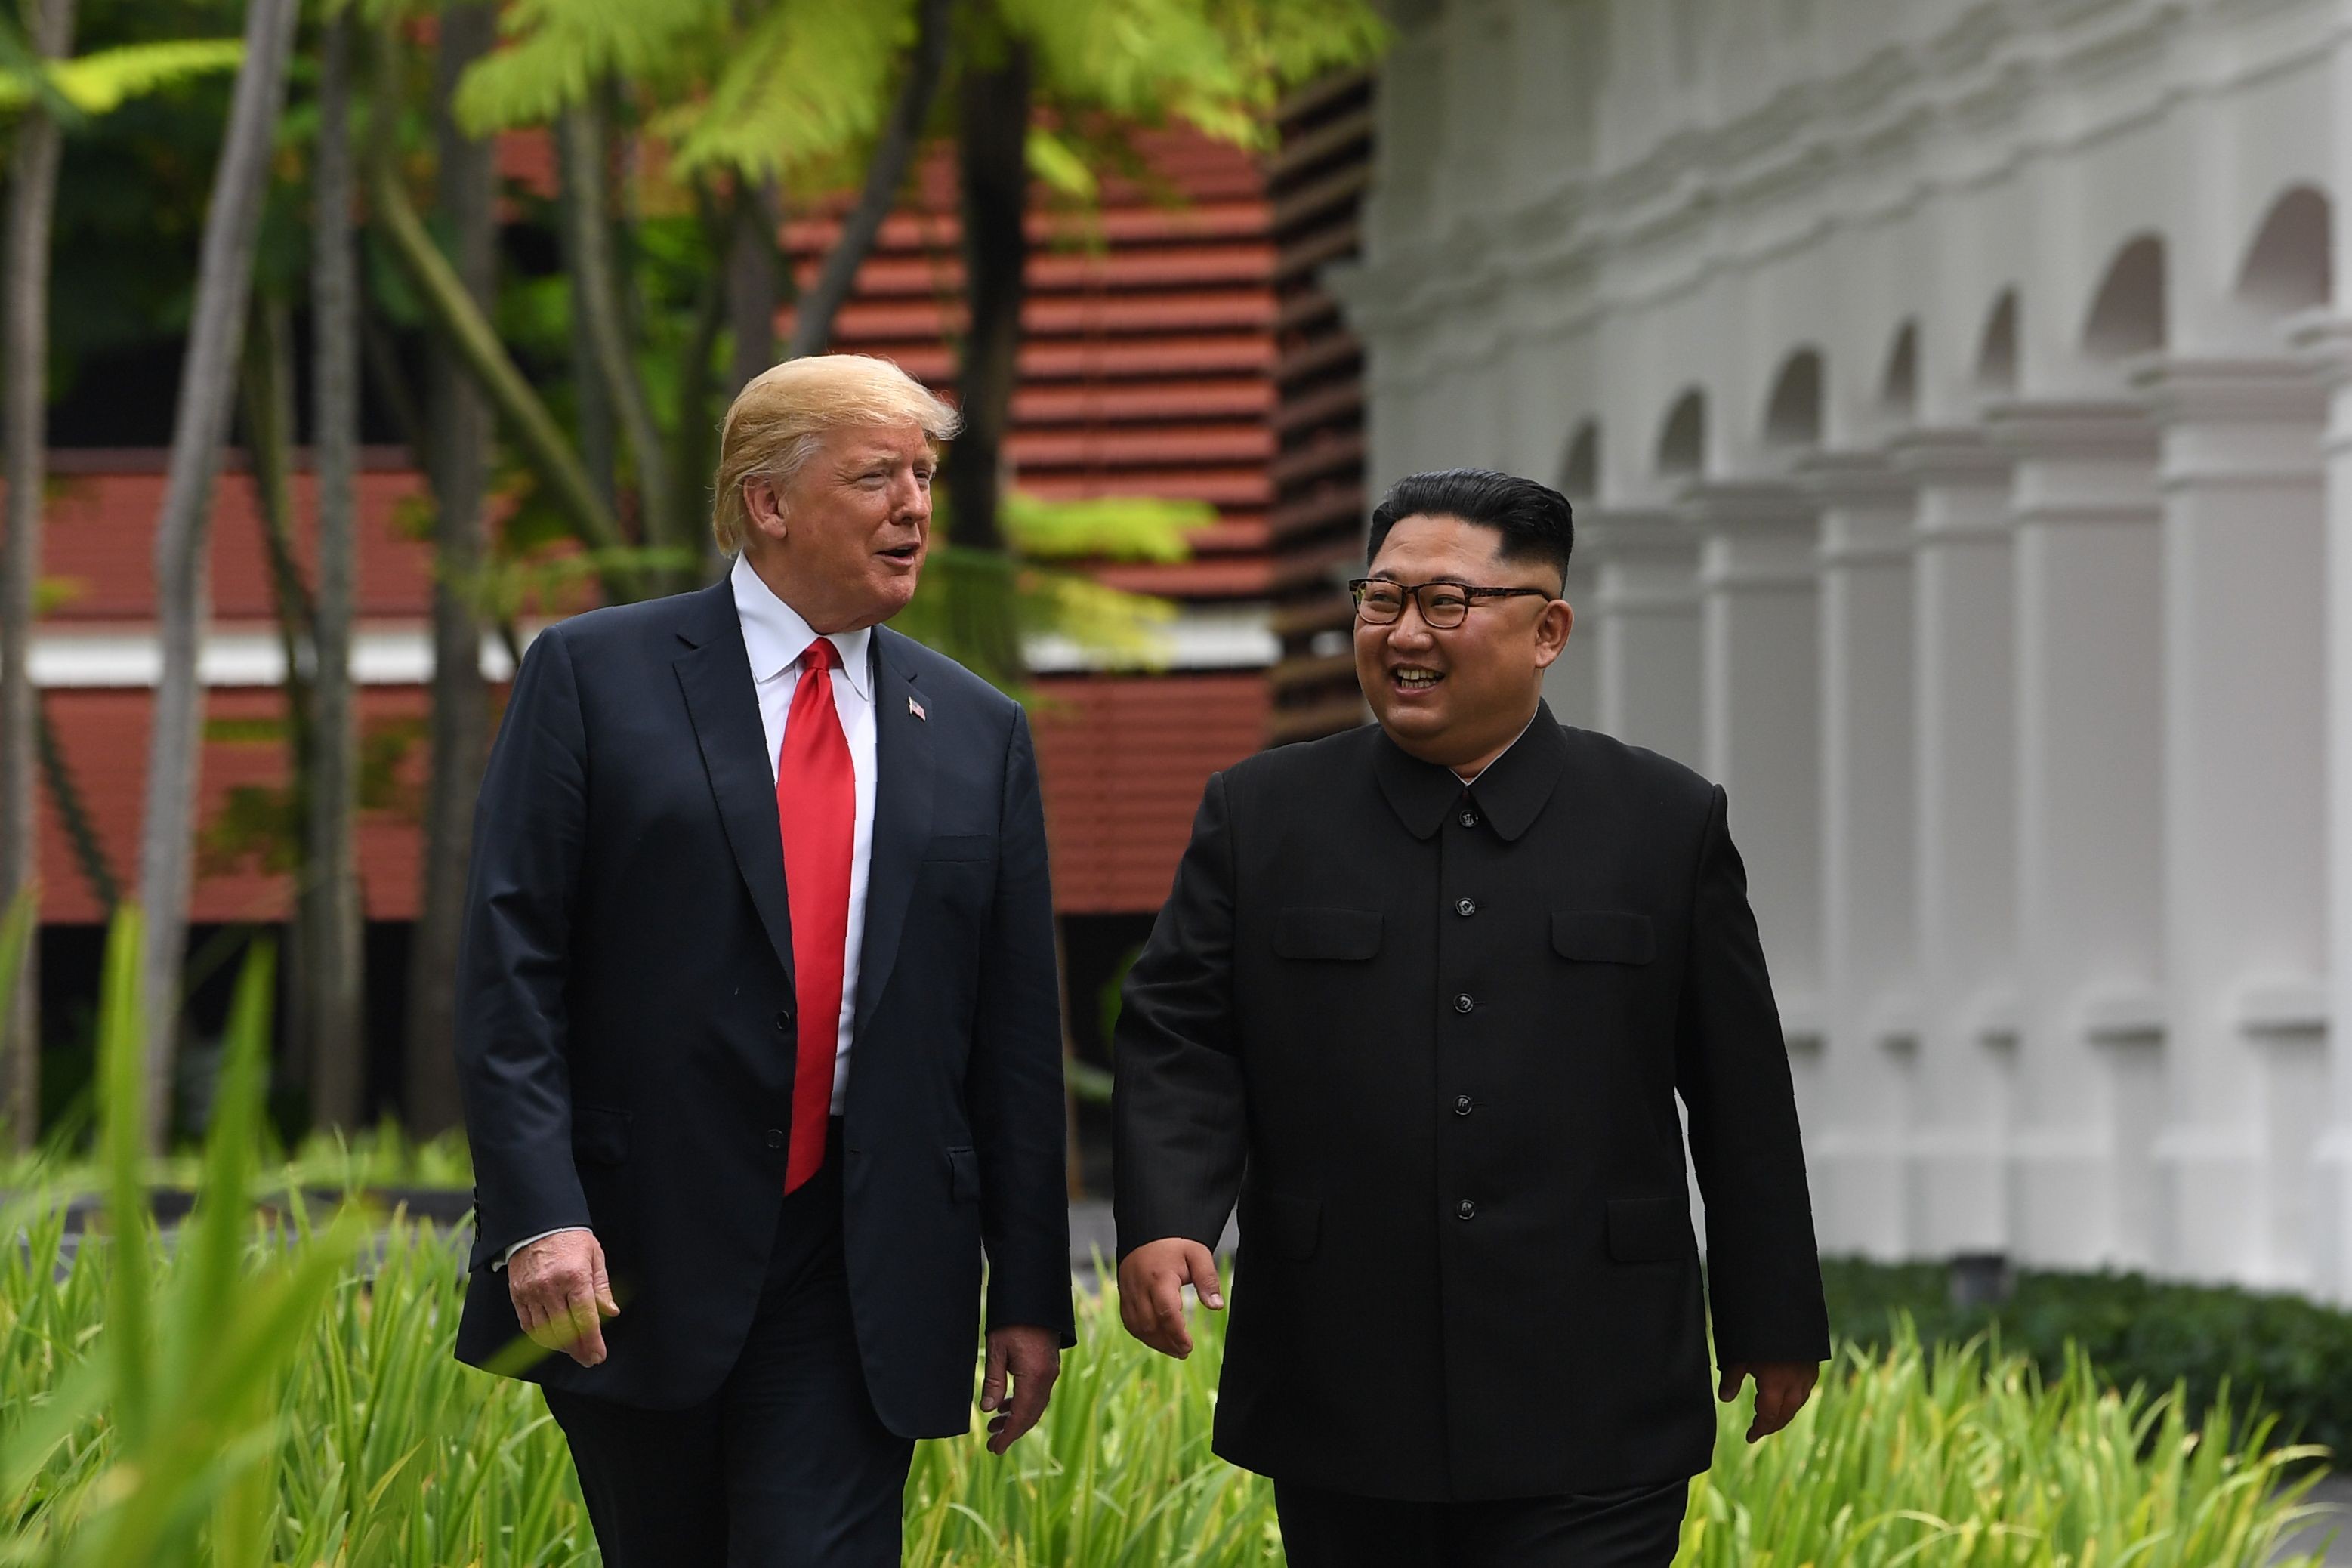 North Korea’s leader Kim Jong-un (right) walks with US President Donald Trump during a break in talks at their historic US-North Korea summit, at the Capella Hotel on Sentosa island in Singapore on June 12. Trump and Kim became the first sitting US and North Korean leaders to meet to negotiate an end to the decades-old nuclear stand-off on the Korean peninsula. Photo: AFP